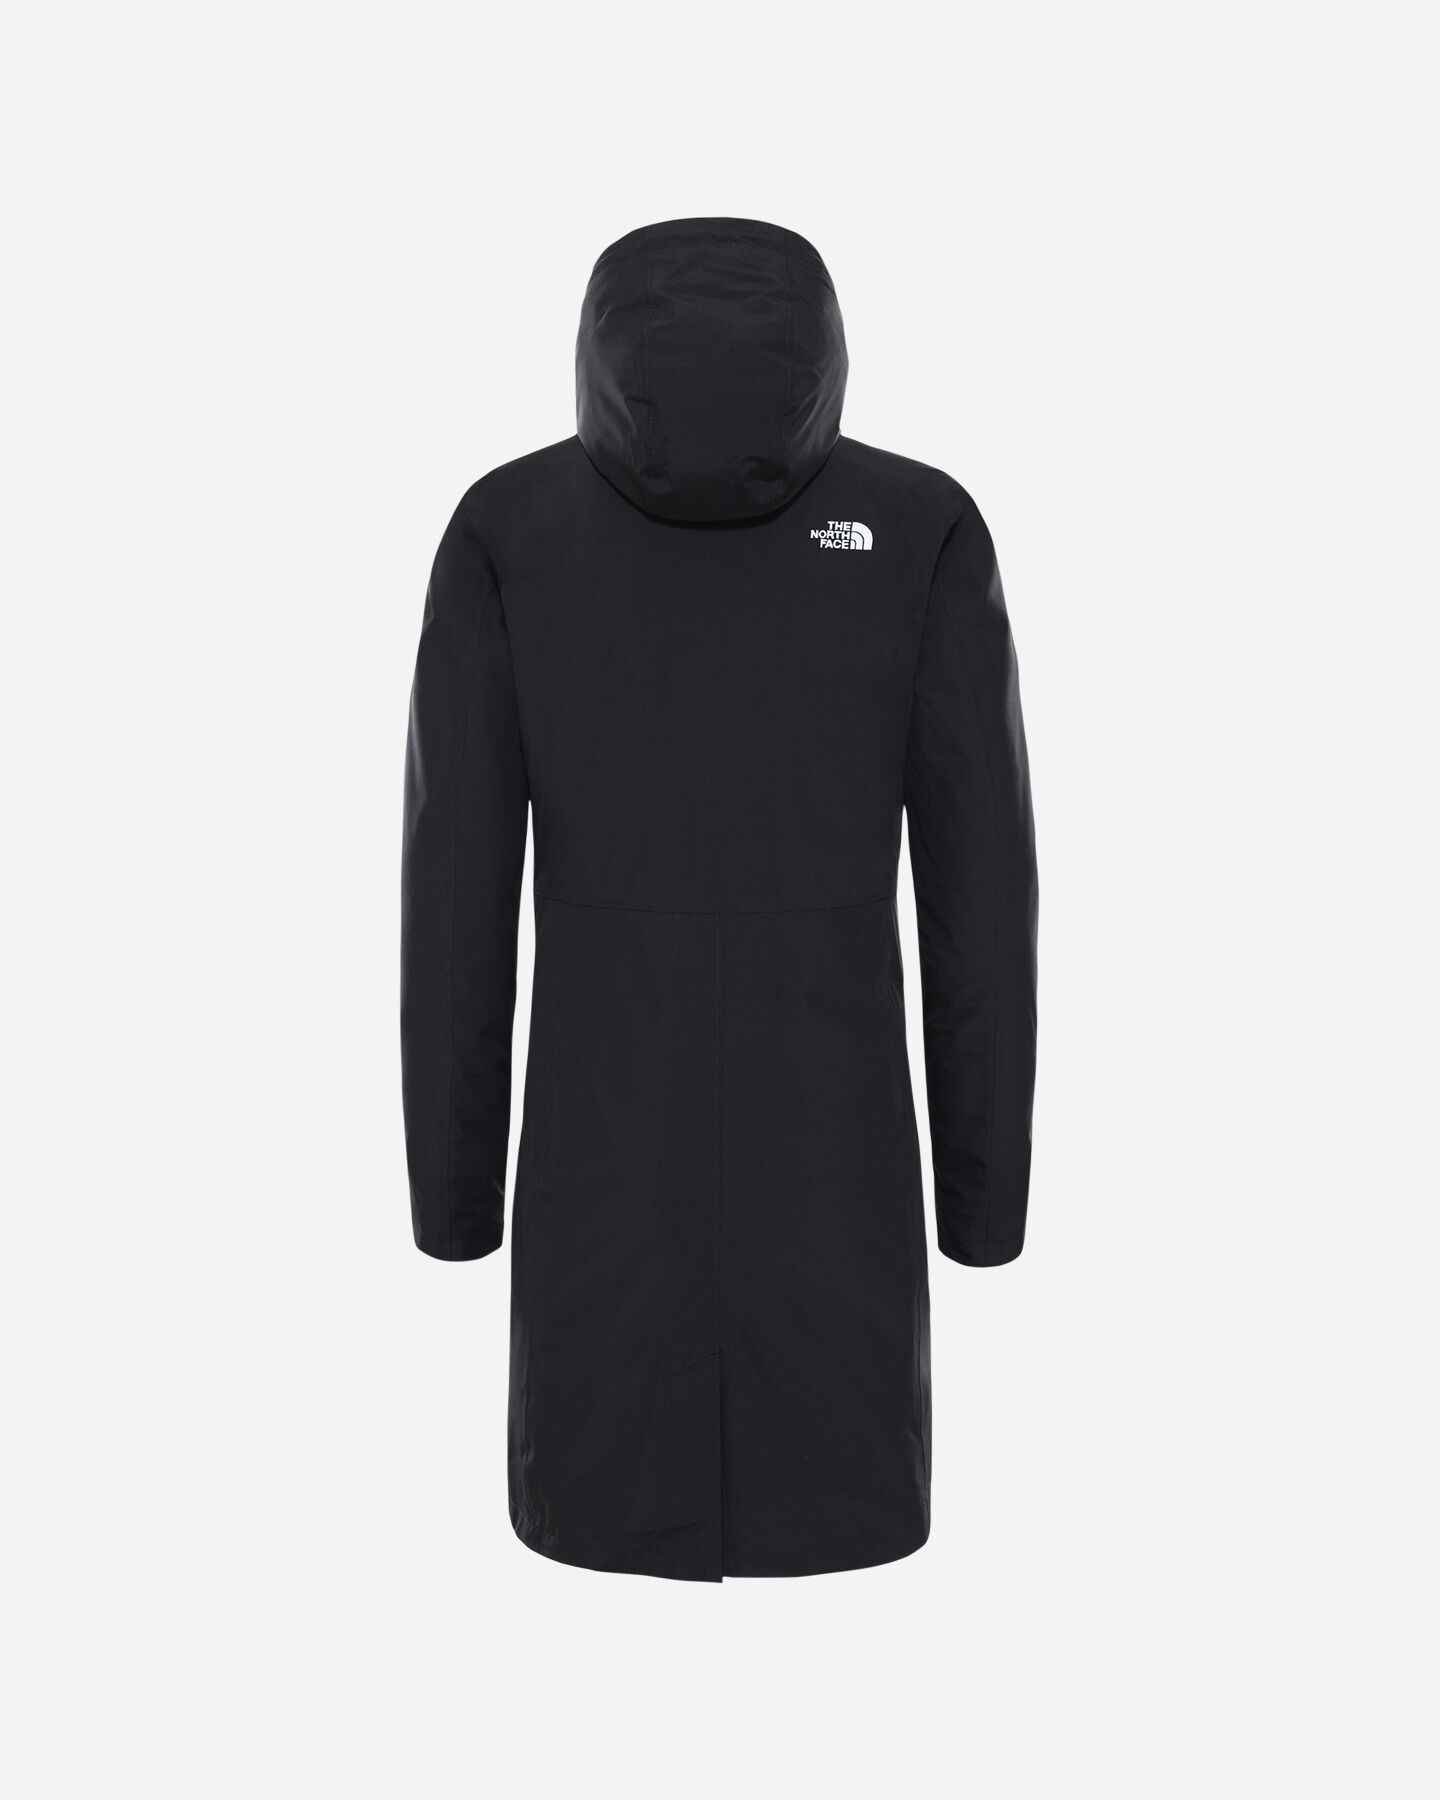  Giacca THE NORTH FACE SUZANNE TRICLIMATE W S5243553|KX7|S scatto 2